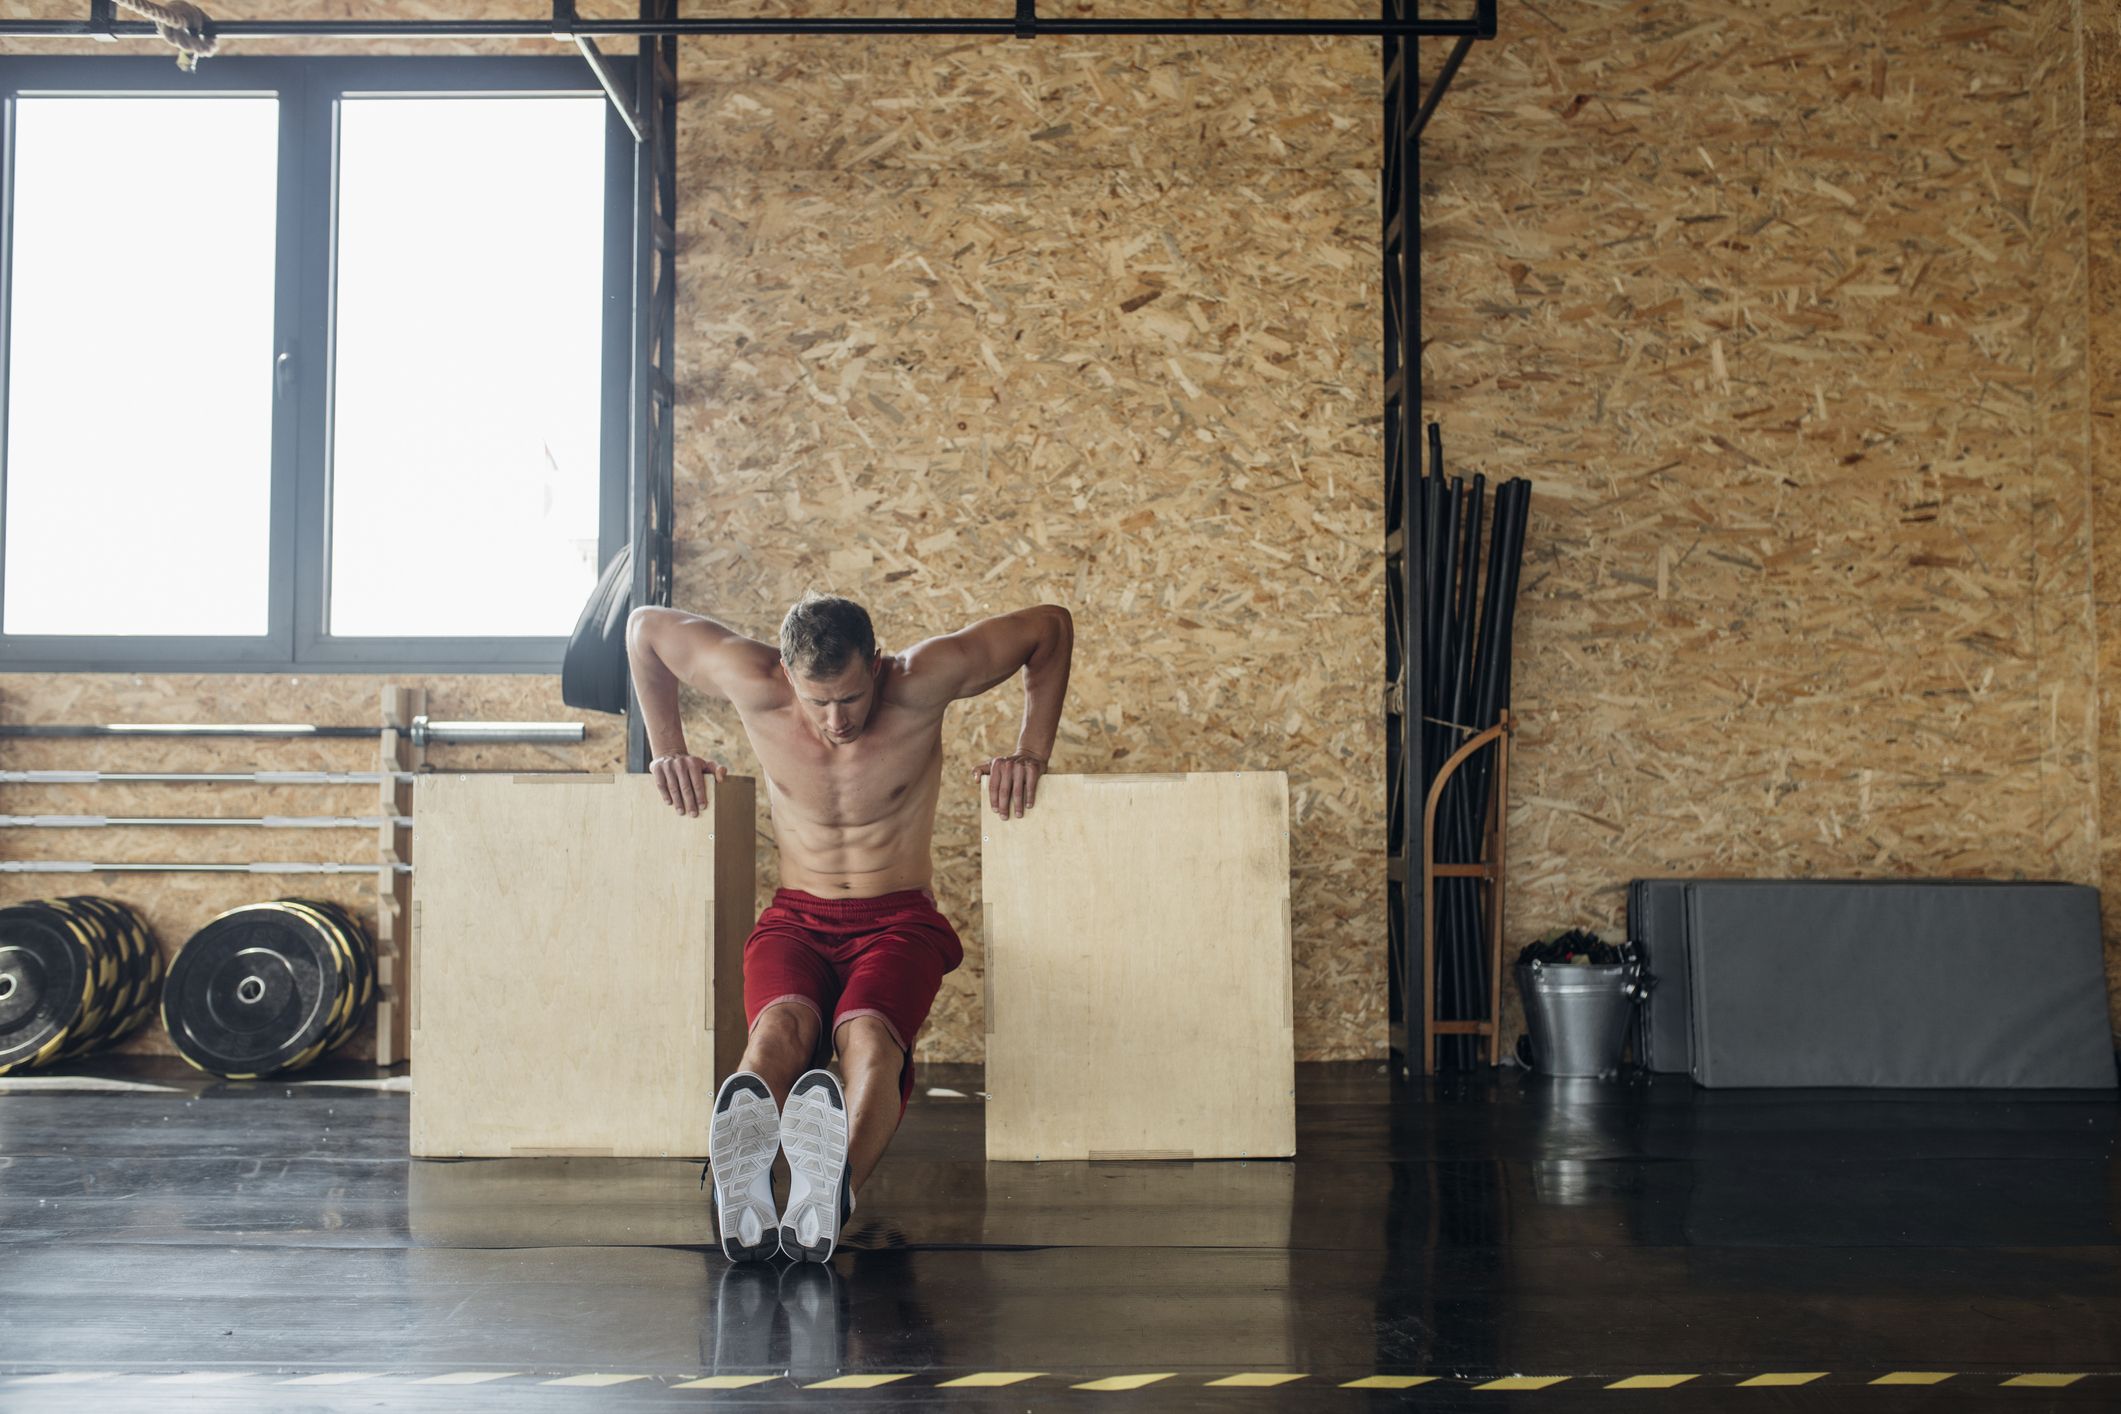 Stop Doing the Bench Dip. Try These Triceps Exercises Instead.